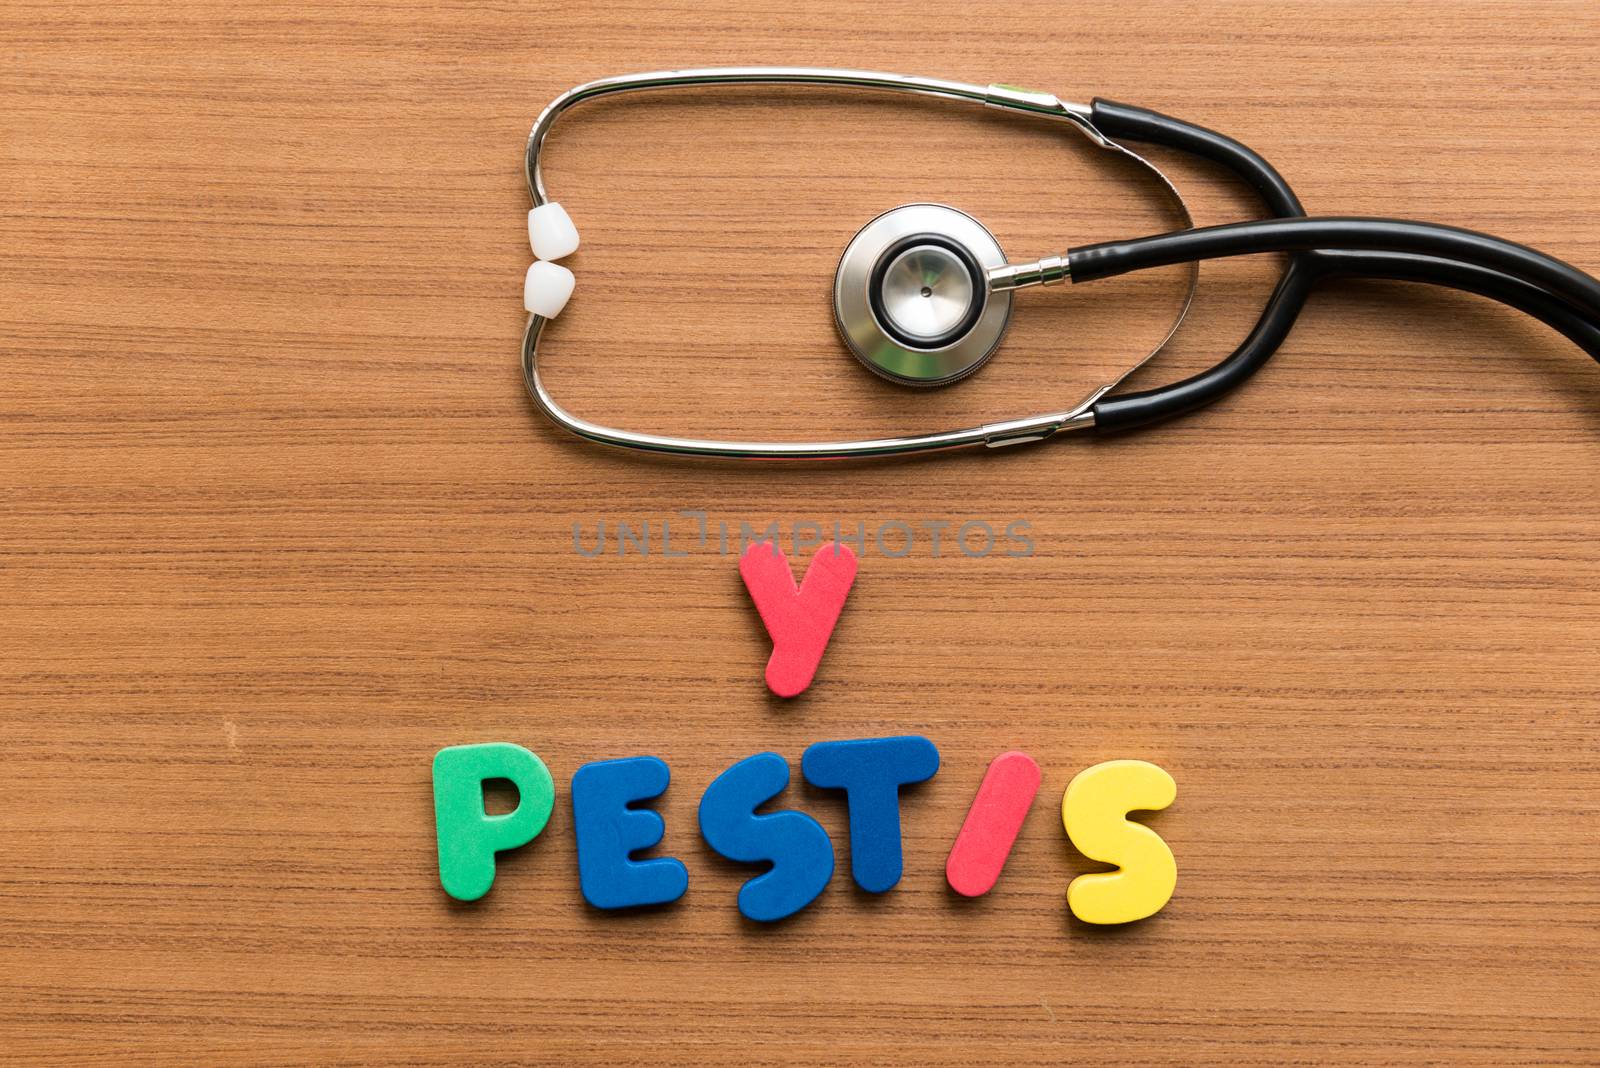 y pestis colorful word with stethoscope by sohel.parvez@hotmail.com